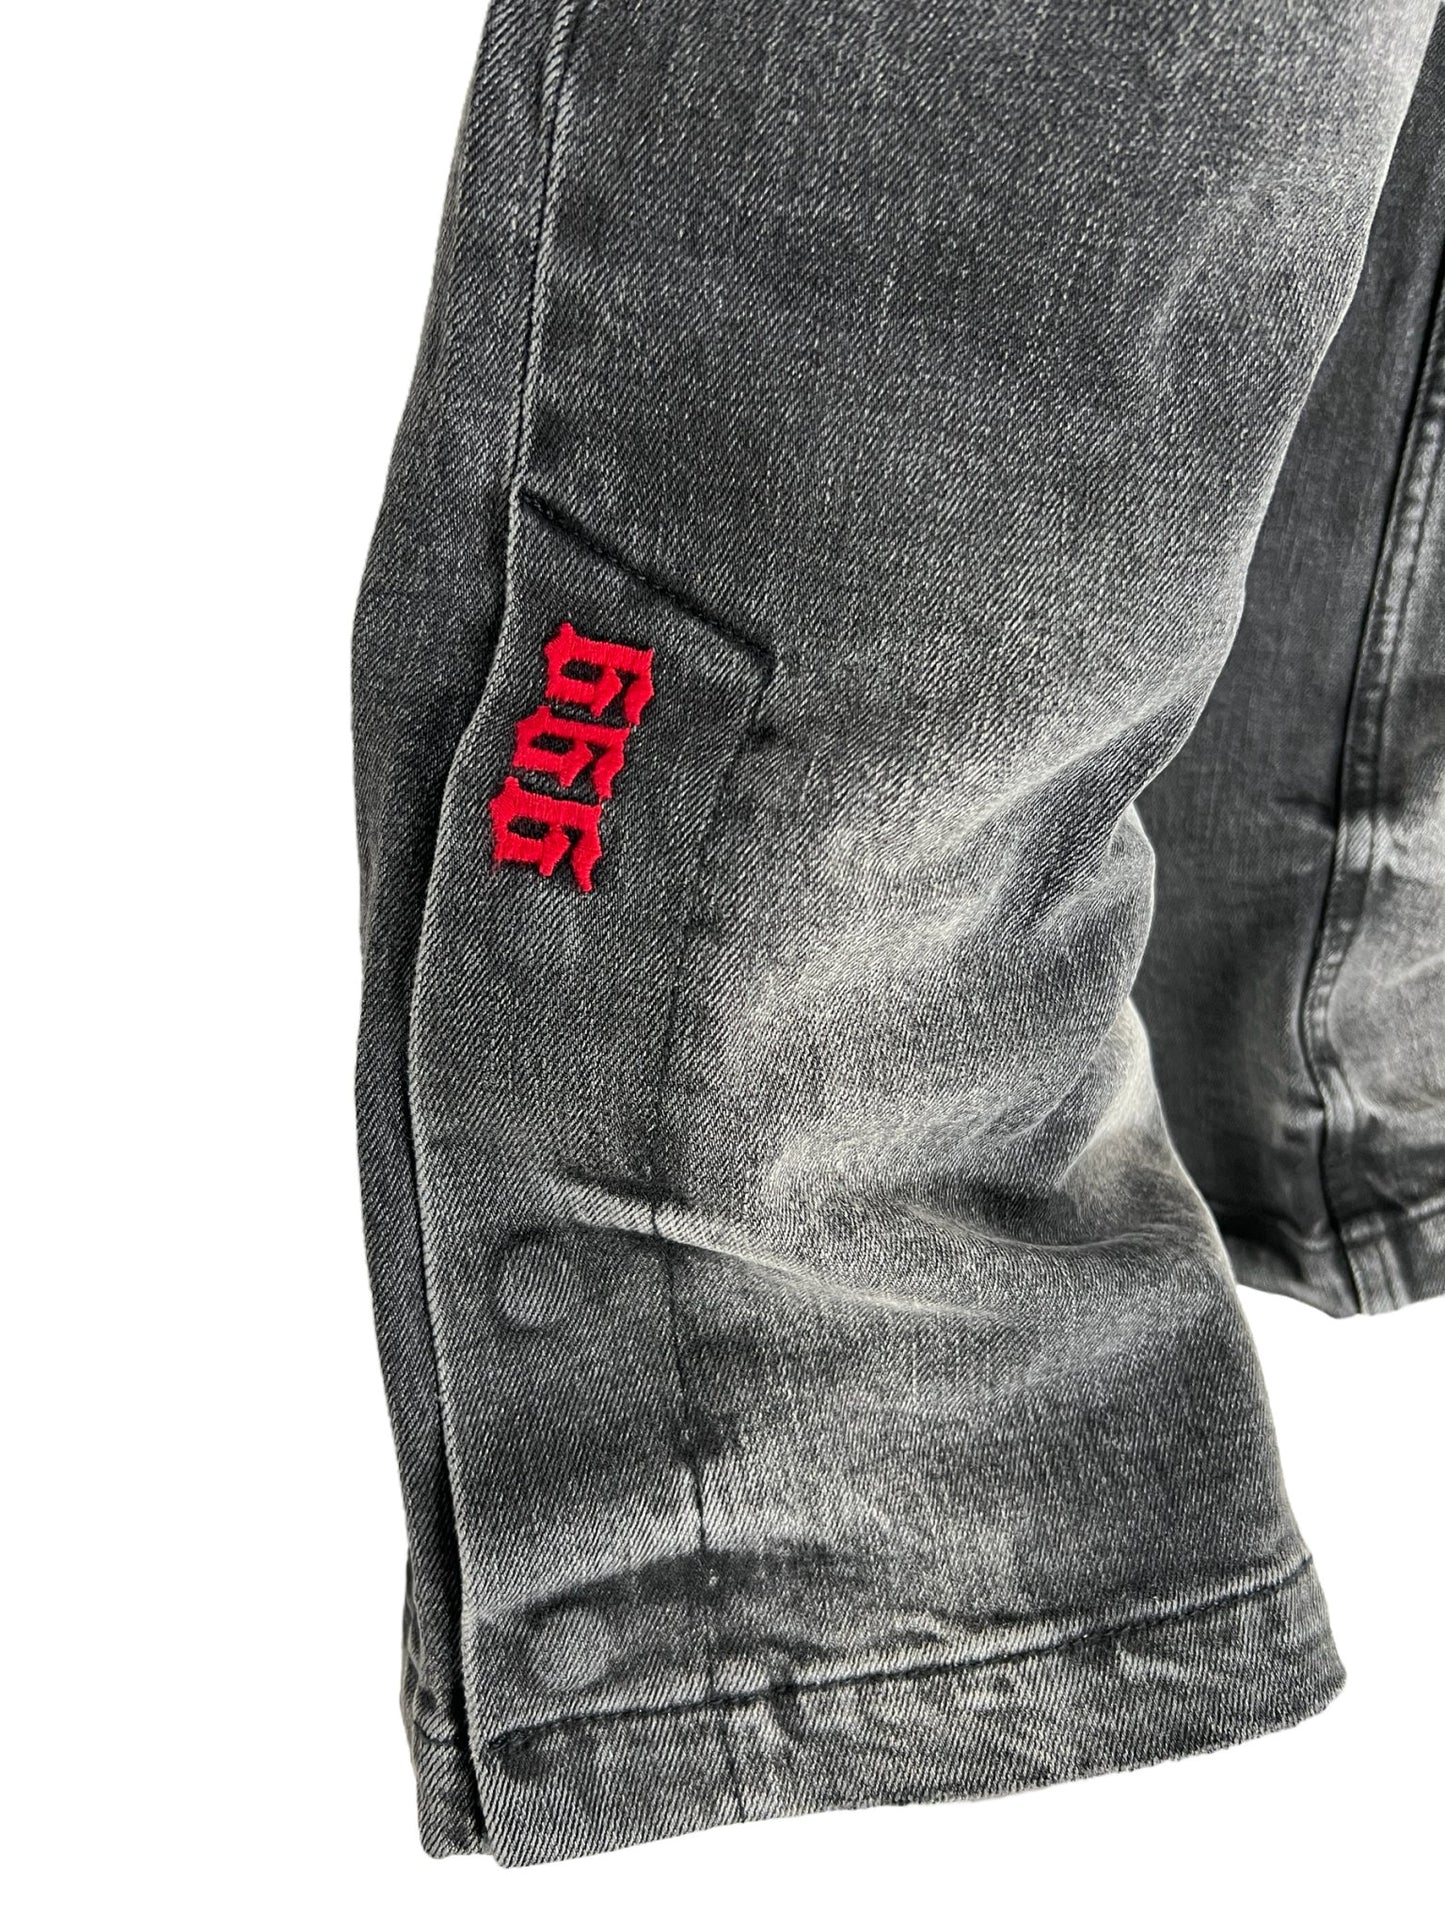 A pair of KSUBI 999 BRONKO CARGO JEANS BLACK with a red embroidery branding on them.